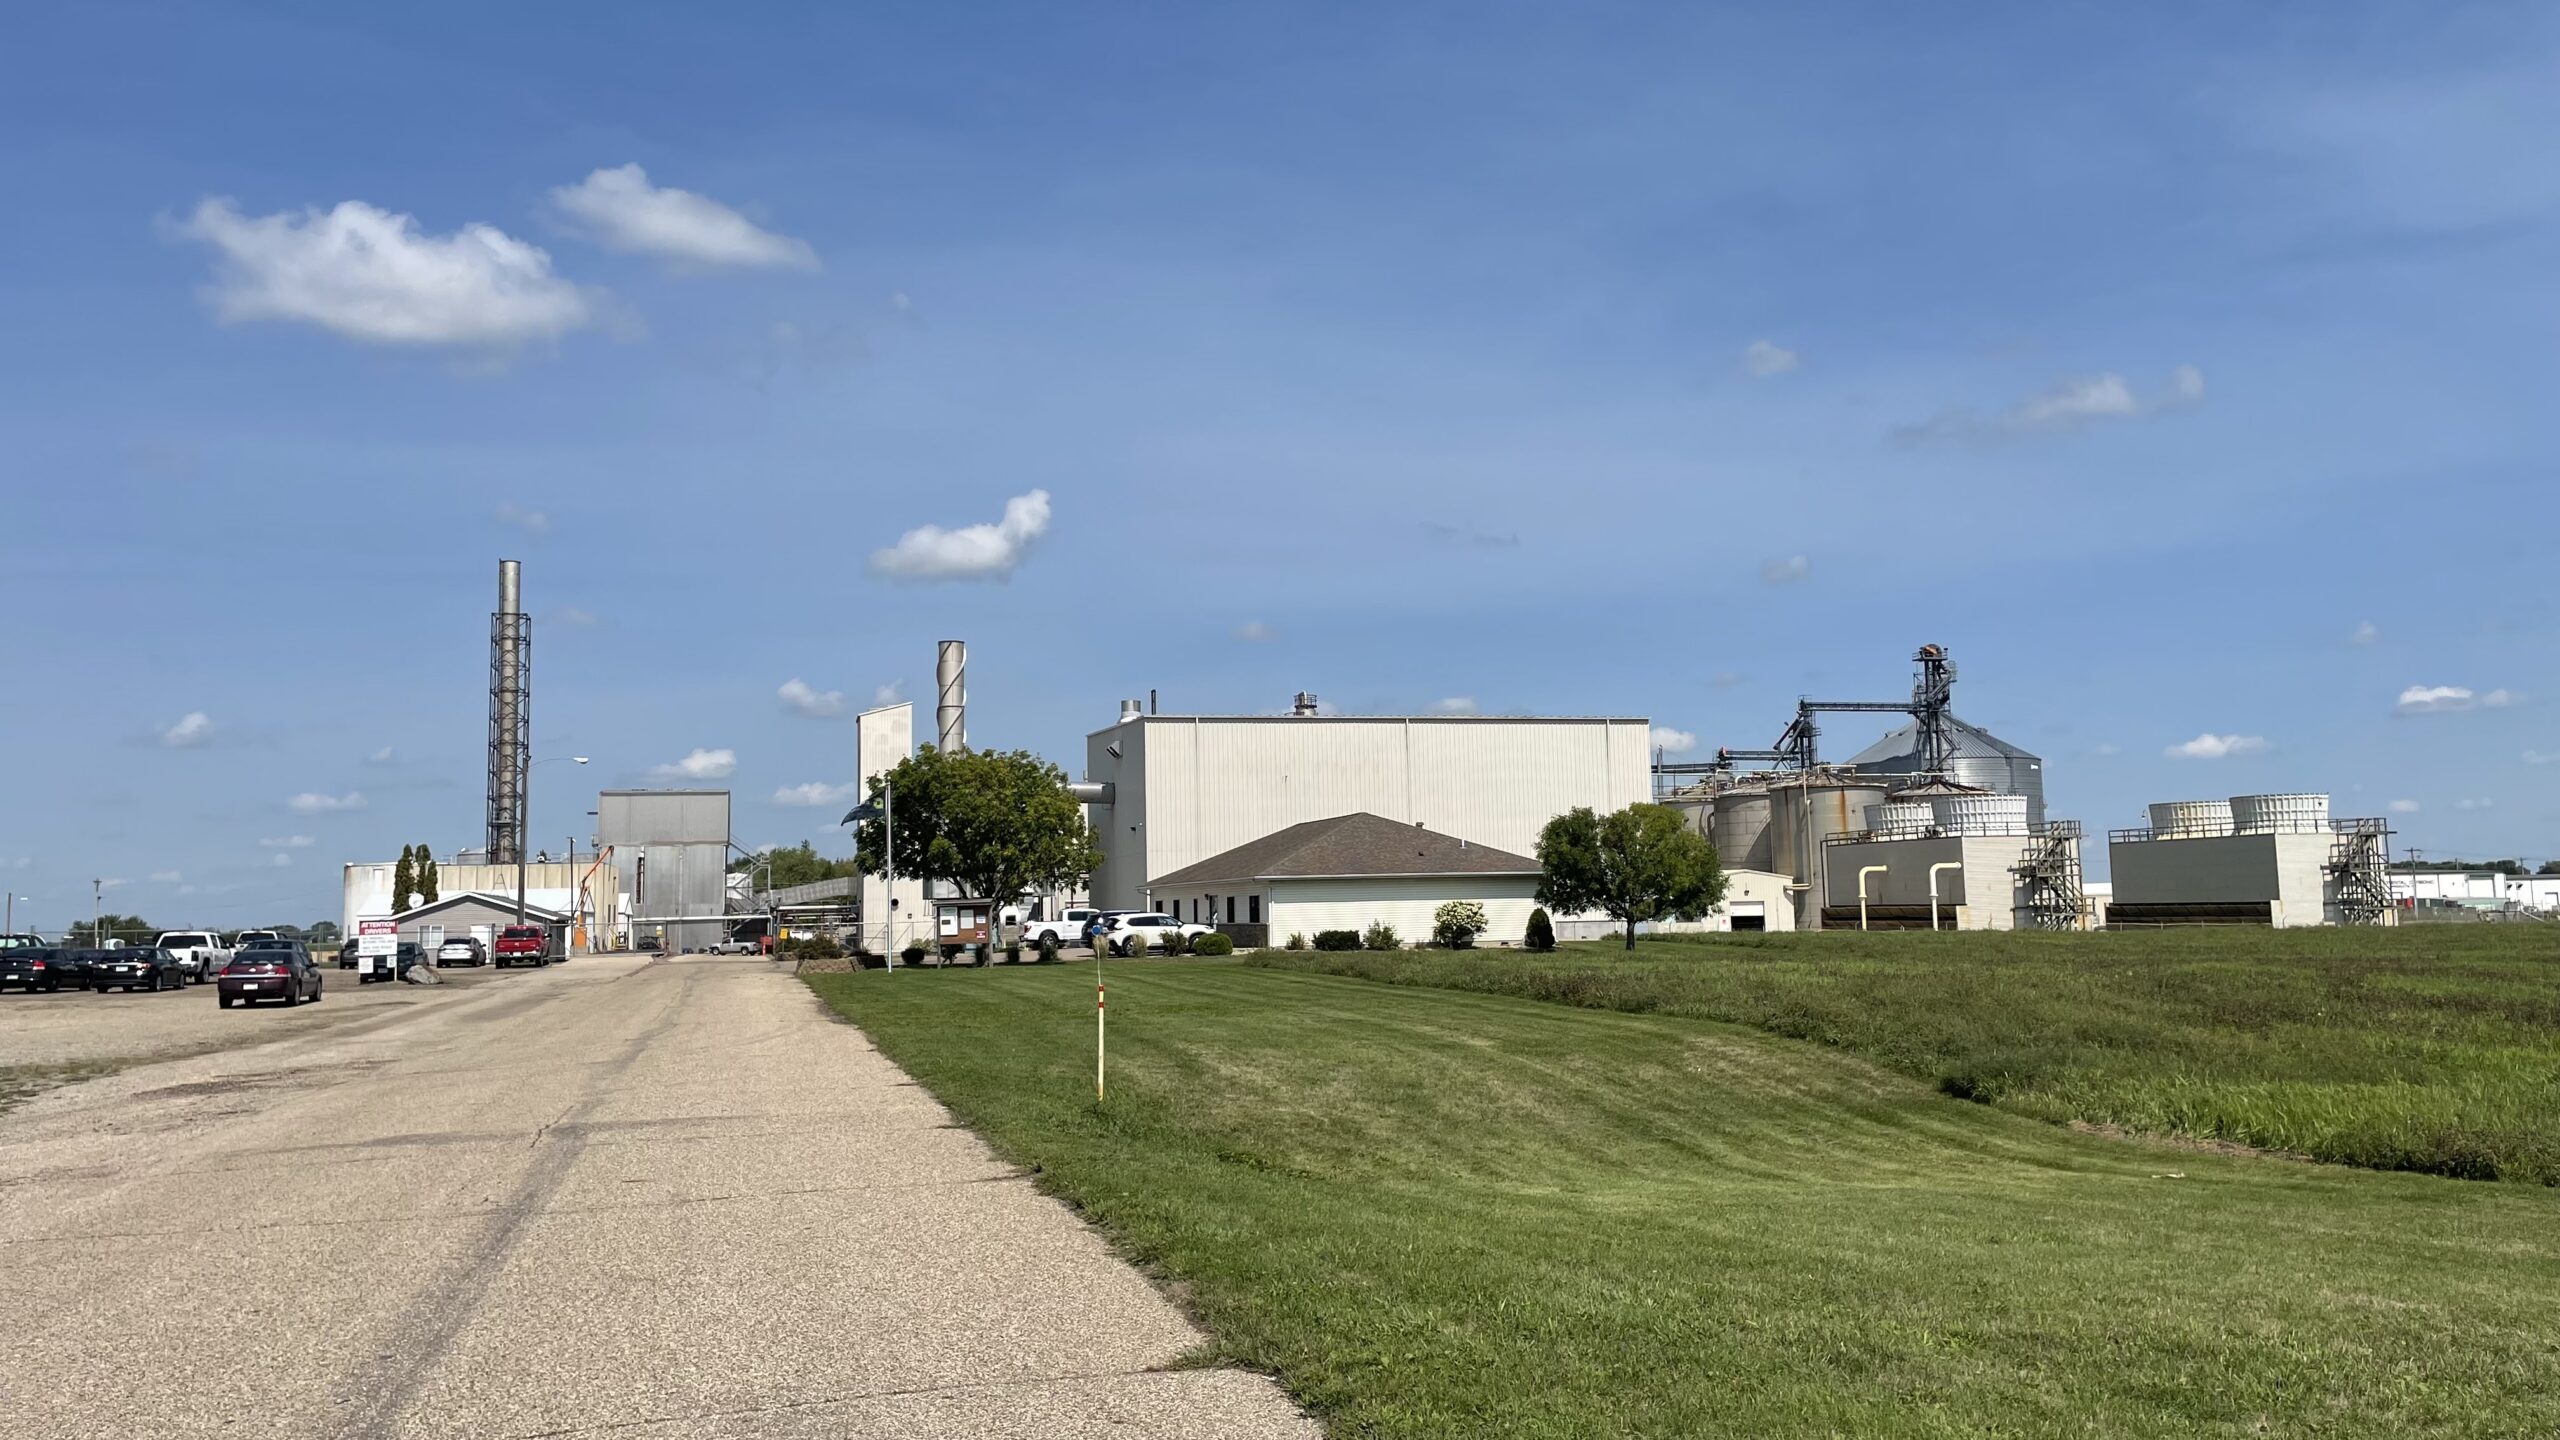 Greenfield Global to Add 48 Million Gallons To Biofuels production With Acquisition of Minnesota Fuel Ethanol Plant